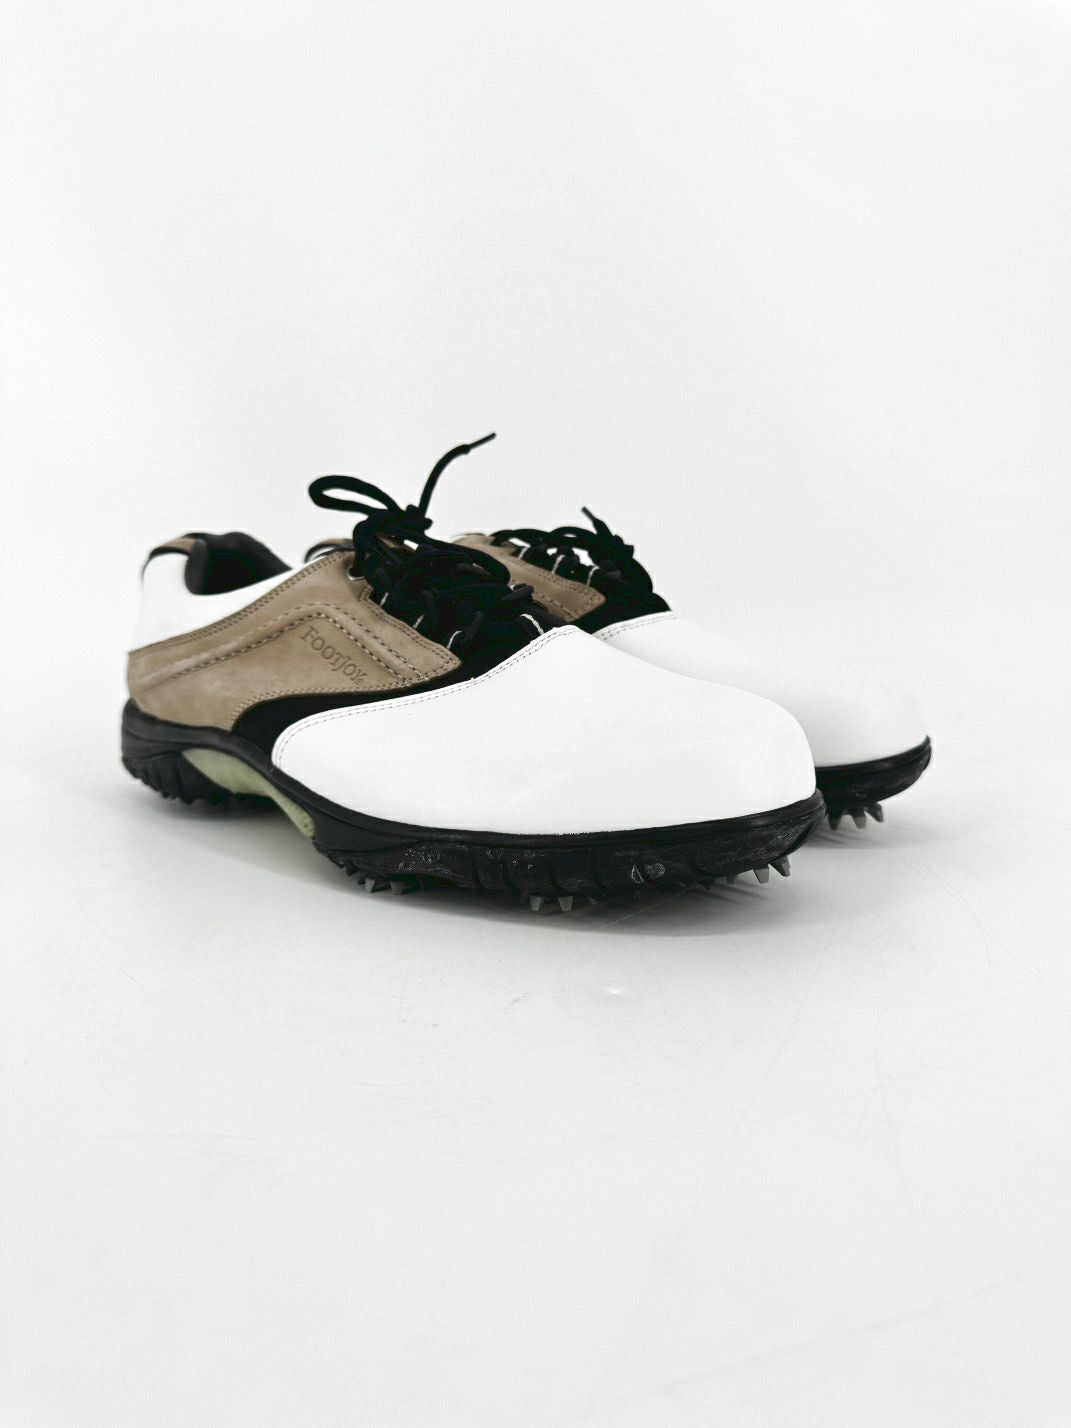 FOOTJOY Size 12 White & Brown Golf Shoes w/ Spikes